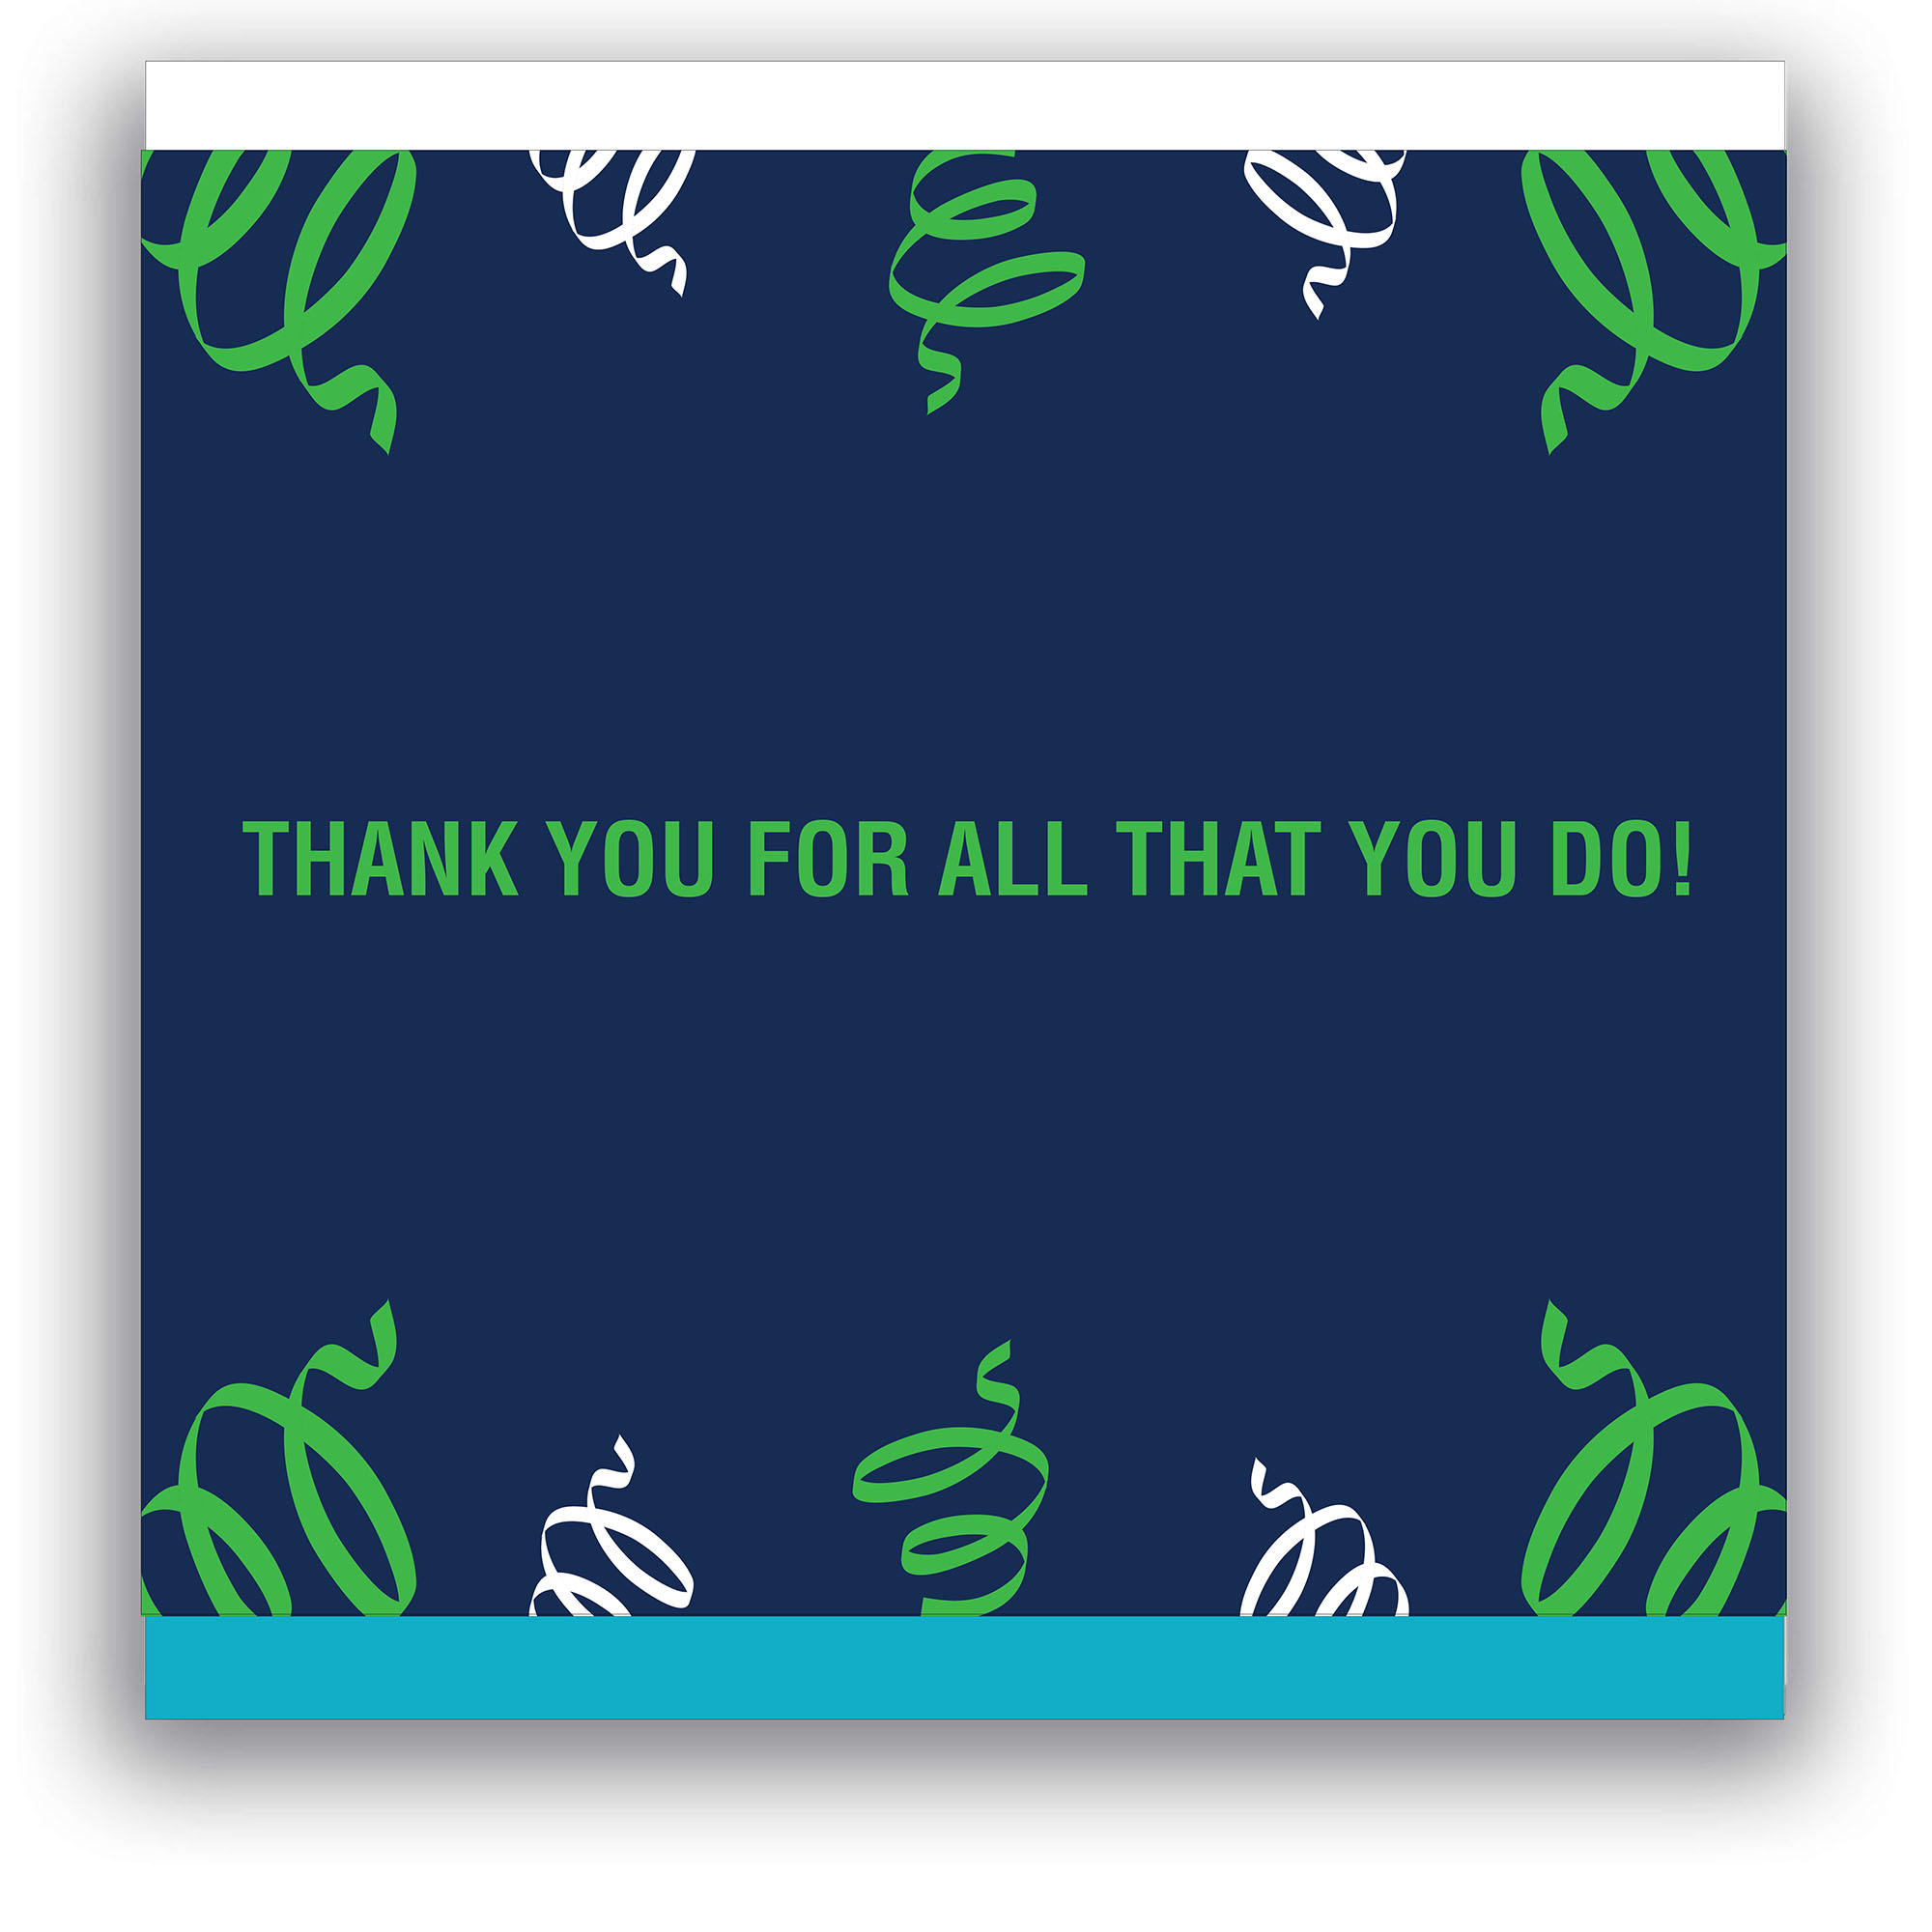 Employee and Client Appreciation Custom Sleeve Design